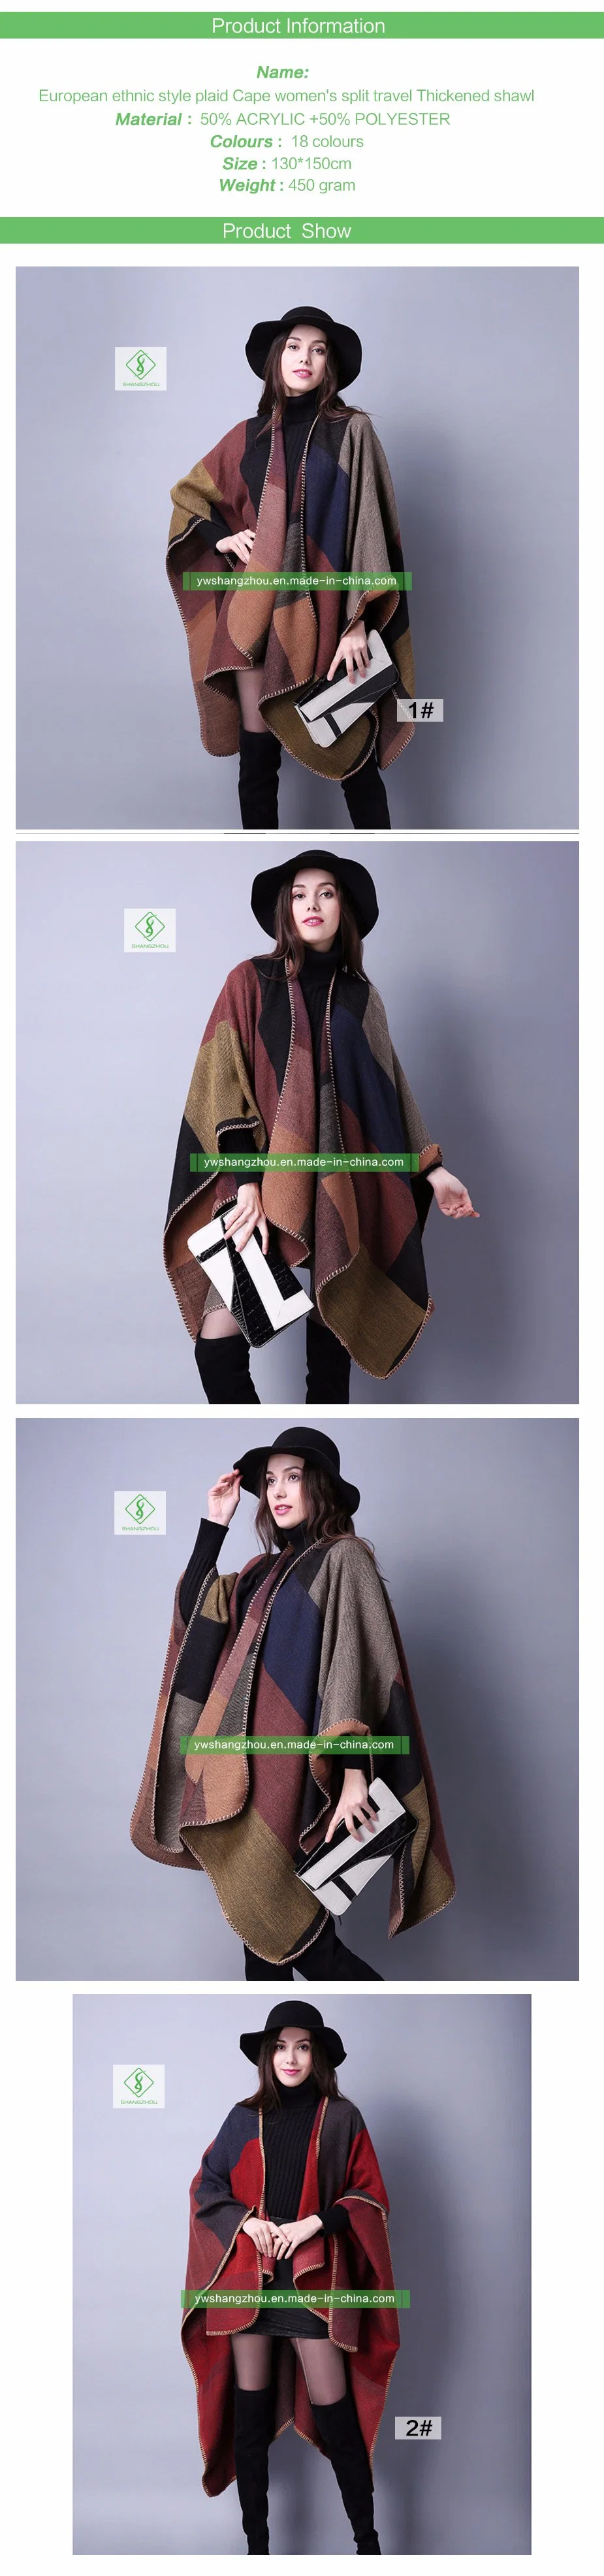 European Ethnic Style Plaid Cape Women&prime;s Cashmere Travel Thickened Shawl